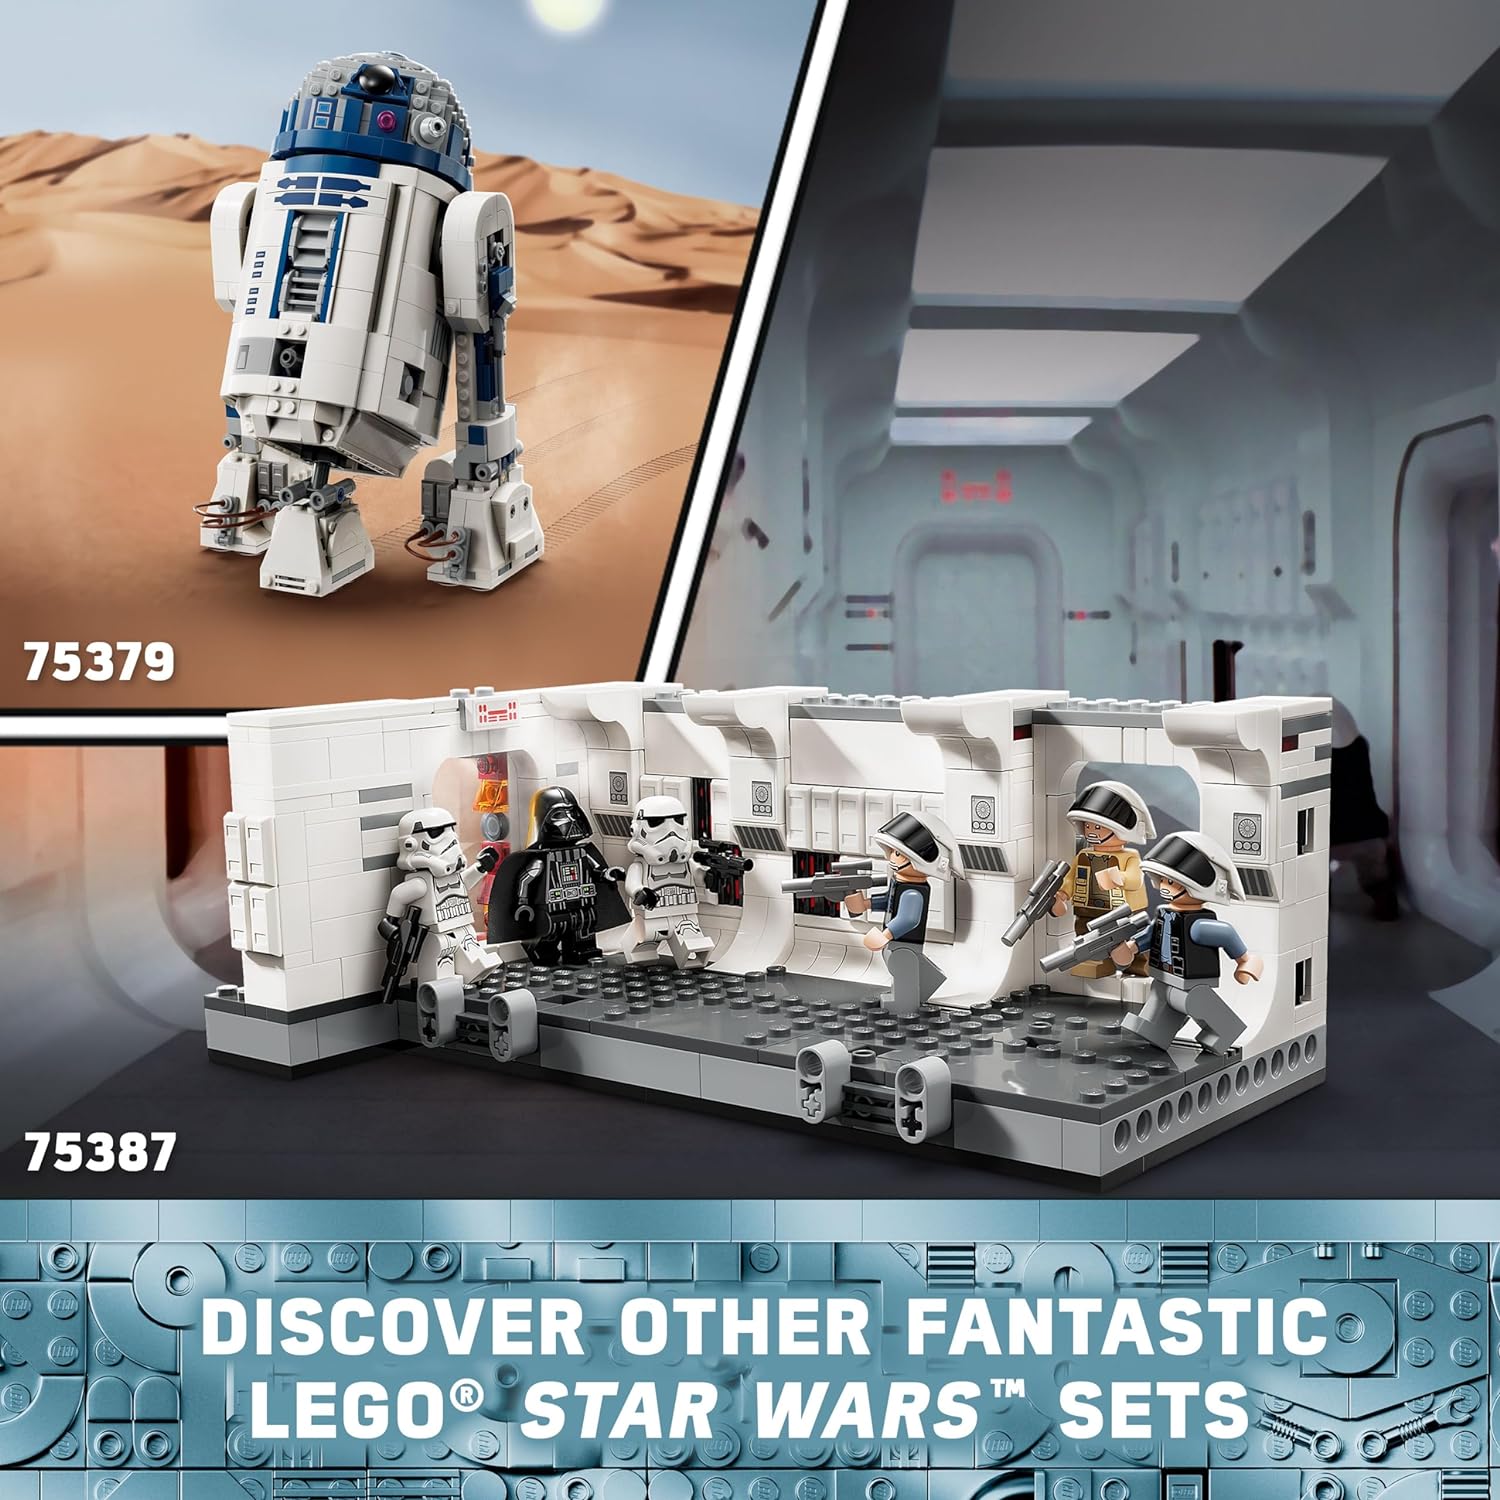 LEGO 75387 Star Wars: A New Hope Boarding The Tantive IV Fantasy Toy, Collectible Star Wars Toy with Exclusive 25th Anniversary Minifigure Clone Trooper Fives.